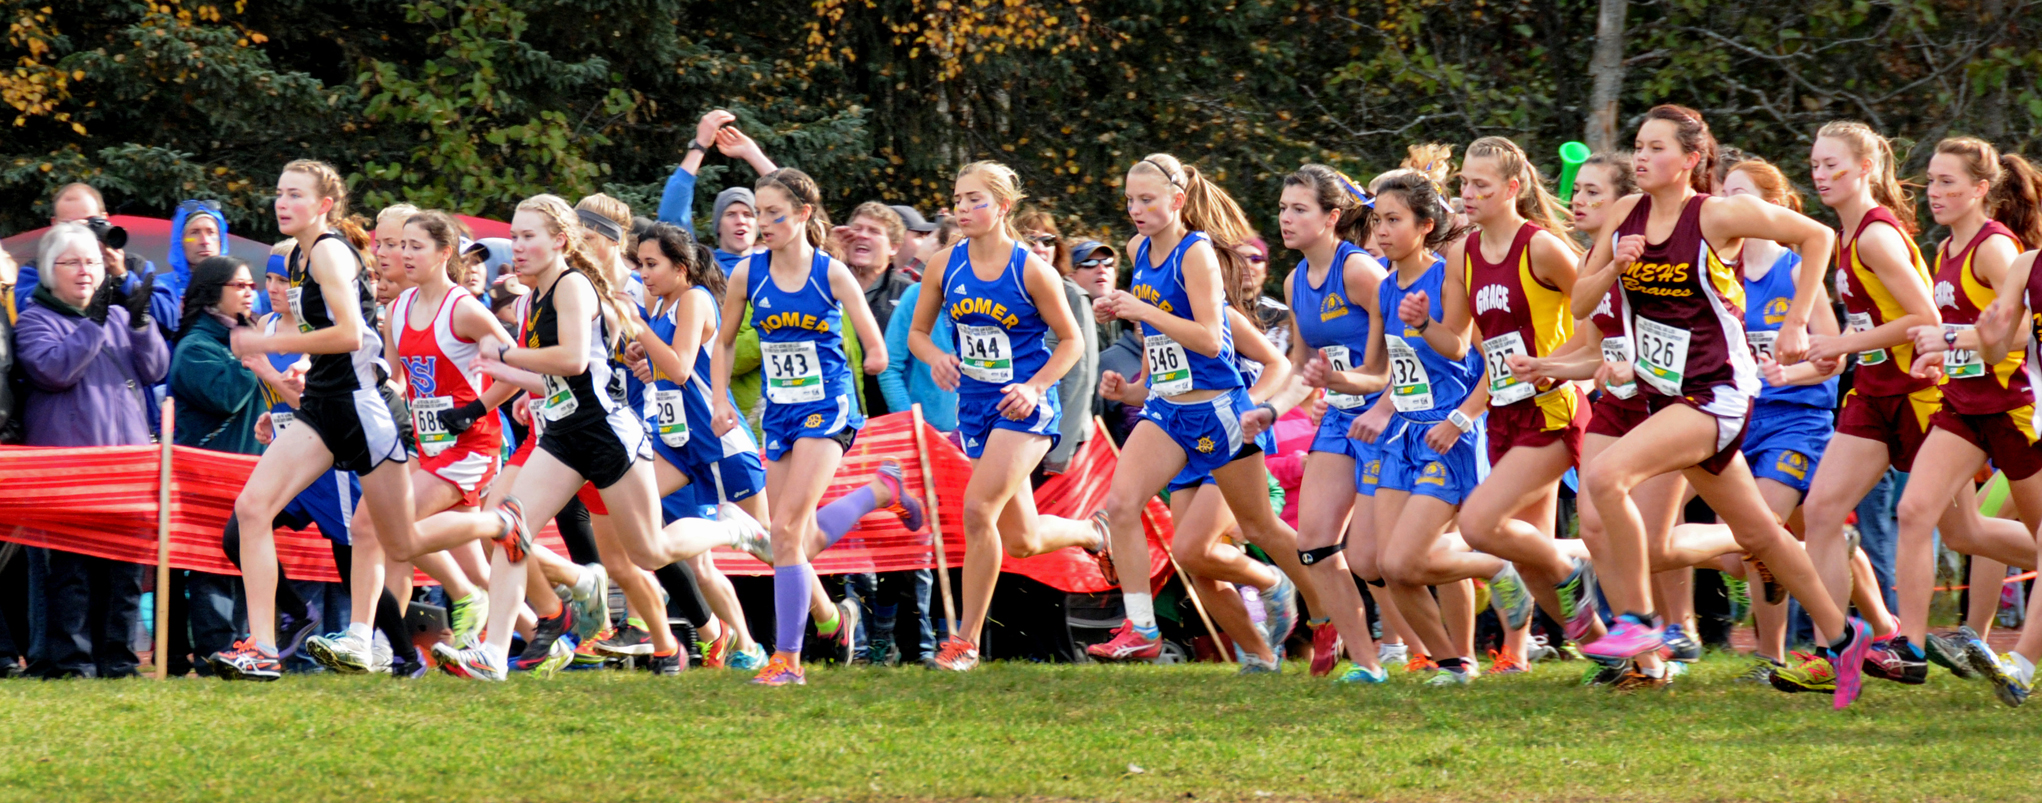 Mariner runners Megan Pitzman, 543, Aurora Waclawski, 544, and Ziza Shemet Pitcher, 546, cross the starting line at state competition in Anchorage on Saturday.